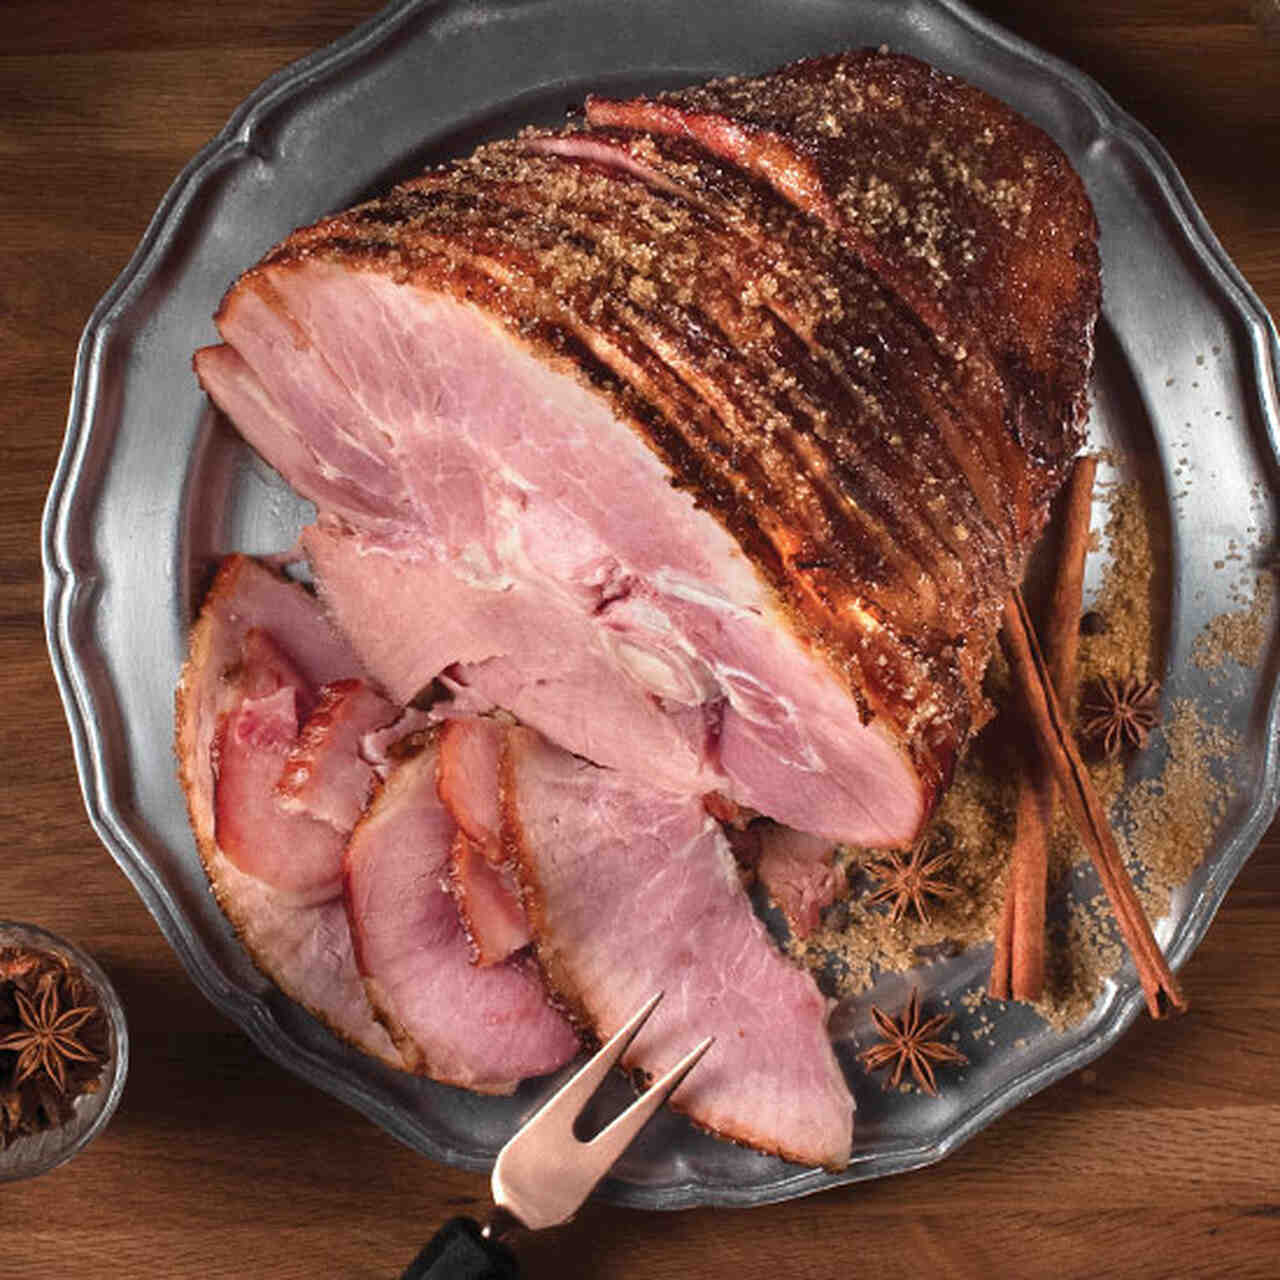 Which is healthier cured or uncured ham?